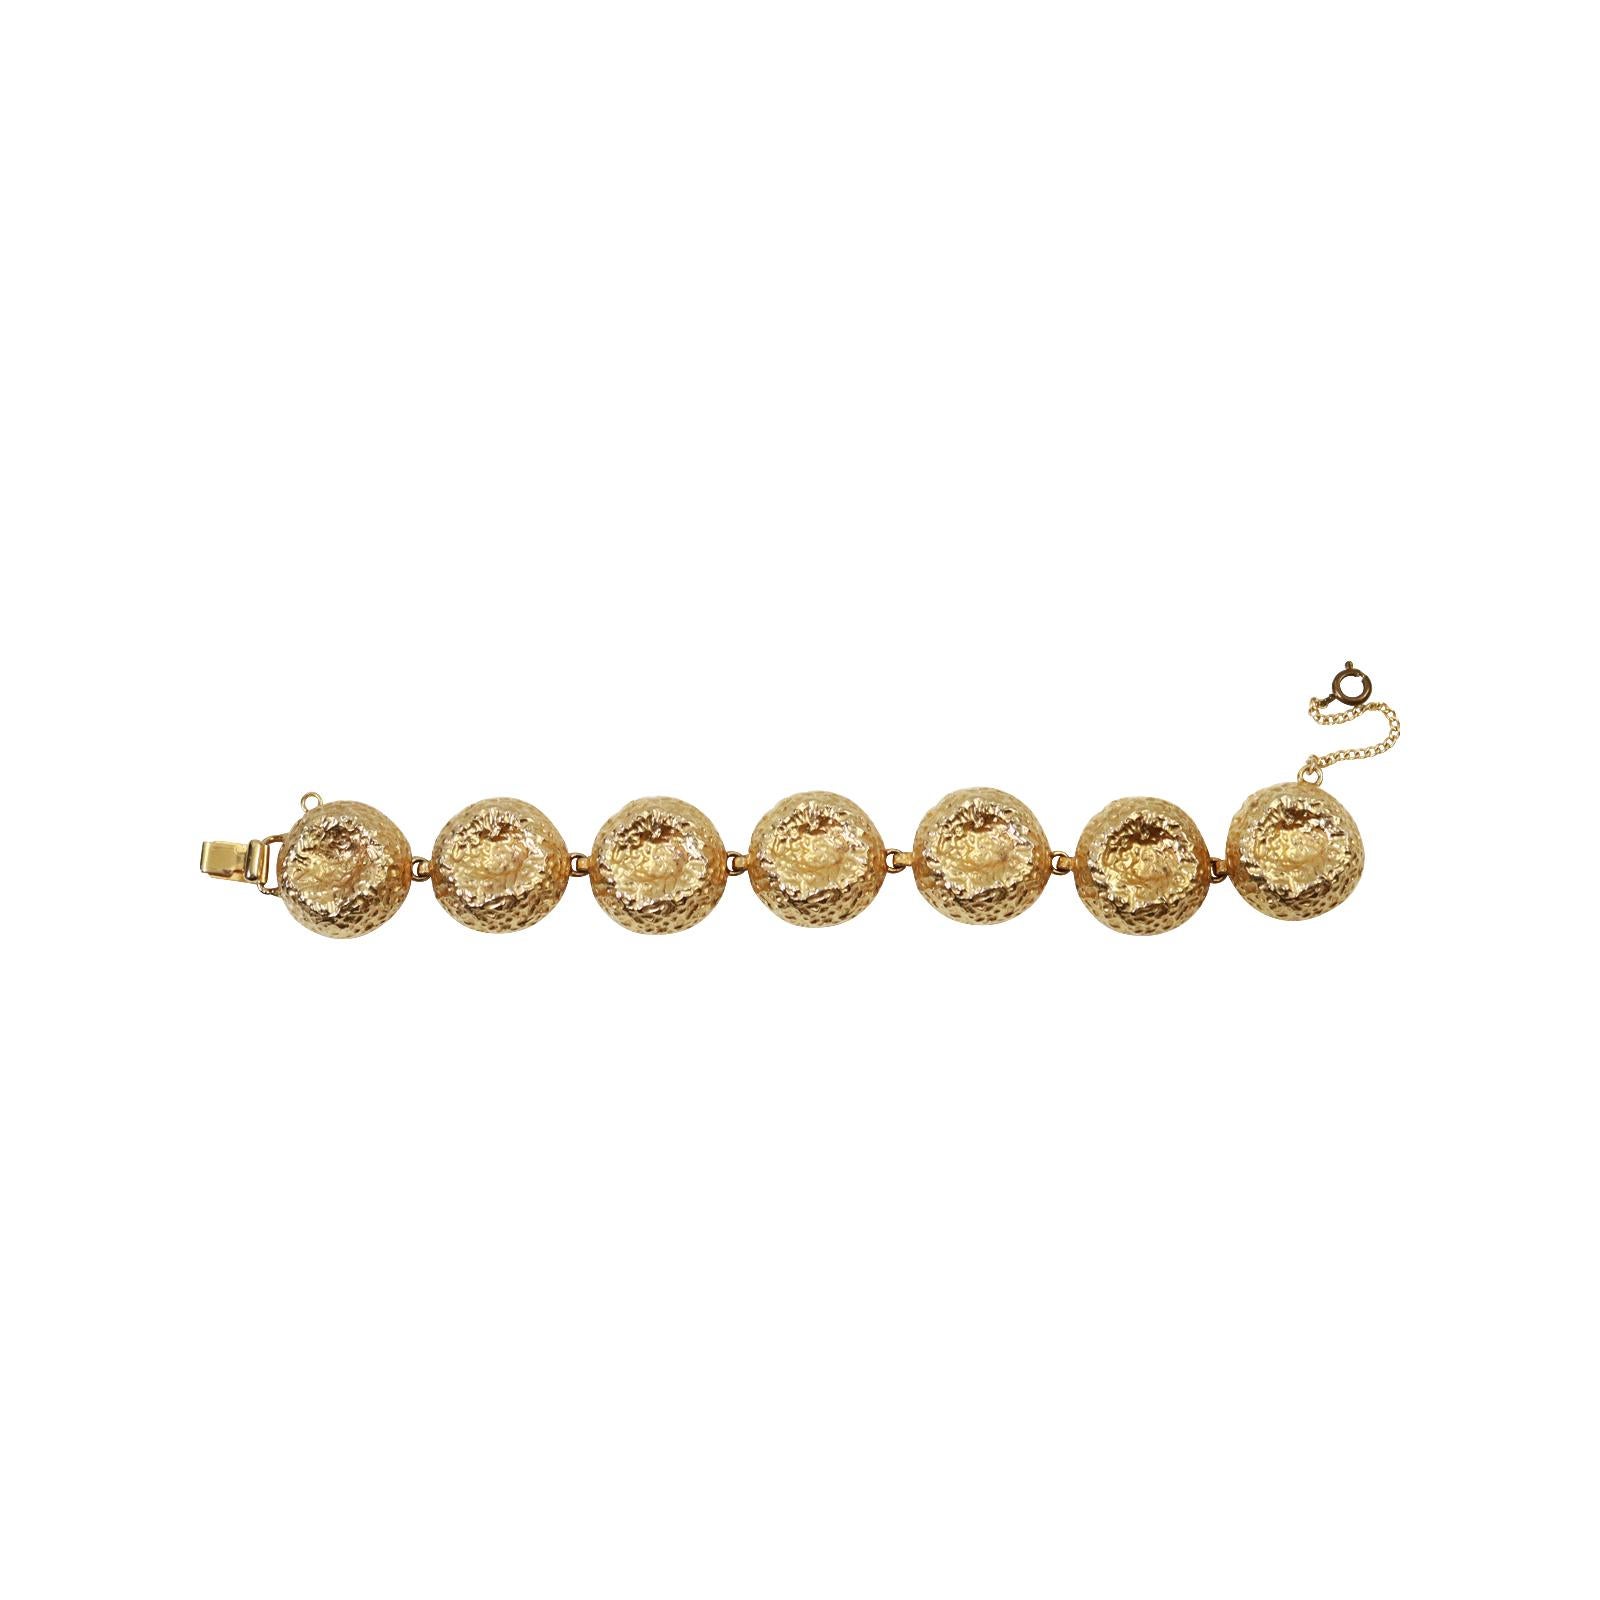 Vintage Nettie Rosenstein Gold Tone Bracelet Circa 1960s.Vintage Nettie Rosenstein Gold  Bracelet with Gold Domed  Discs.  The Back features beautiful Design that only the 1960's could provide. This bracelet is so stunning.  The inside of the